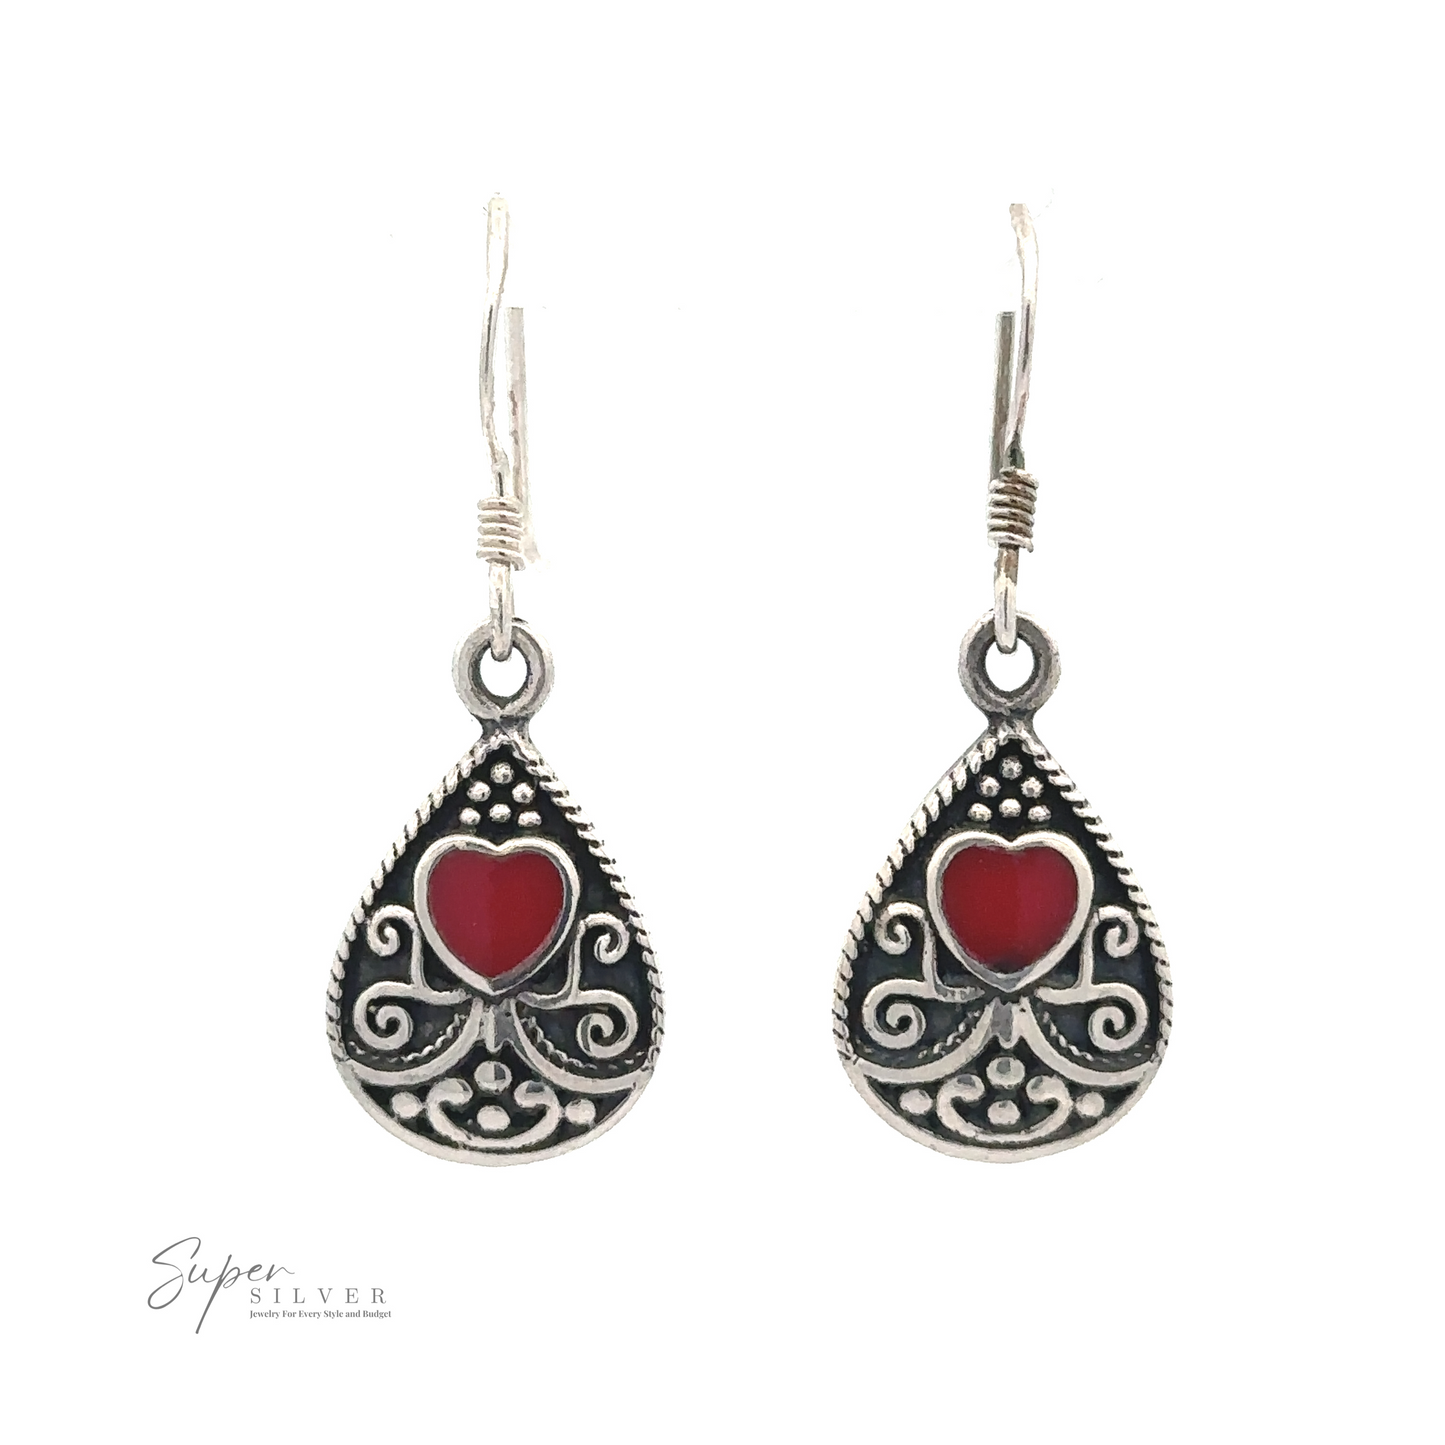 
                  
                    Bali Style Teardrop Earrings with Inlaid Stone, featuring intricate black detailing and red heart-shaped centers, crafted from sterling silver. These exquisite pieces are shown on a white background. Adjacent text reads "Super Silver".
                  
                